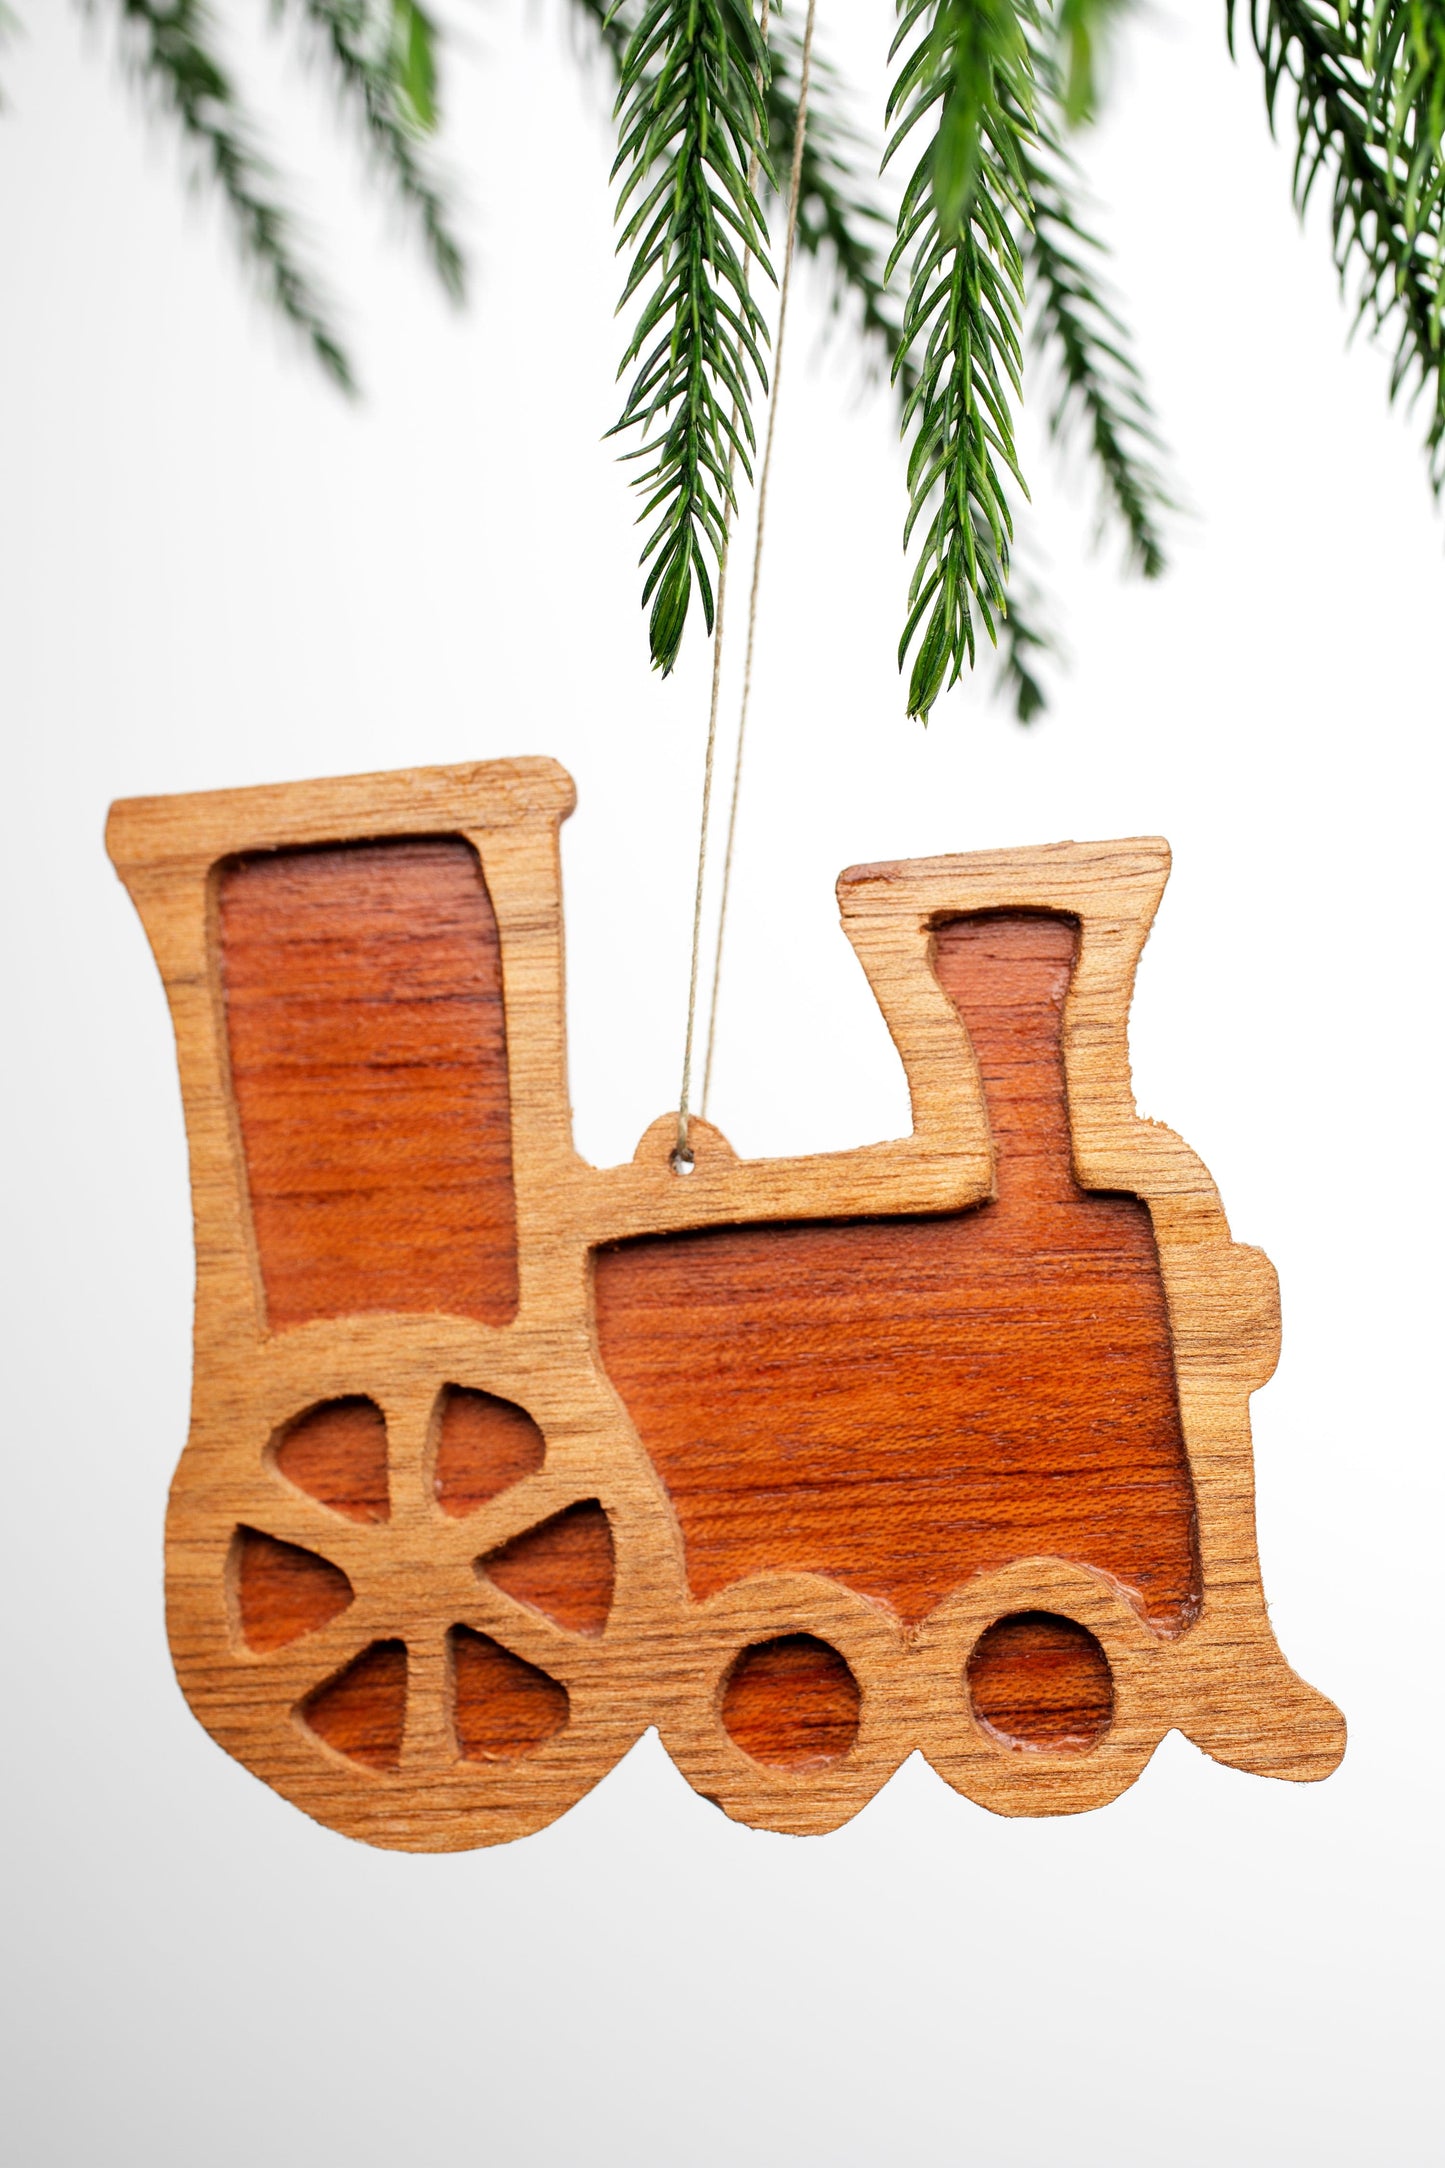 The Carpentry Shop Co. Oak Ornament Solid Wood Holiday Ornaments